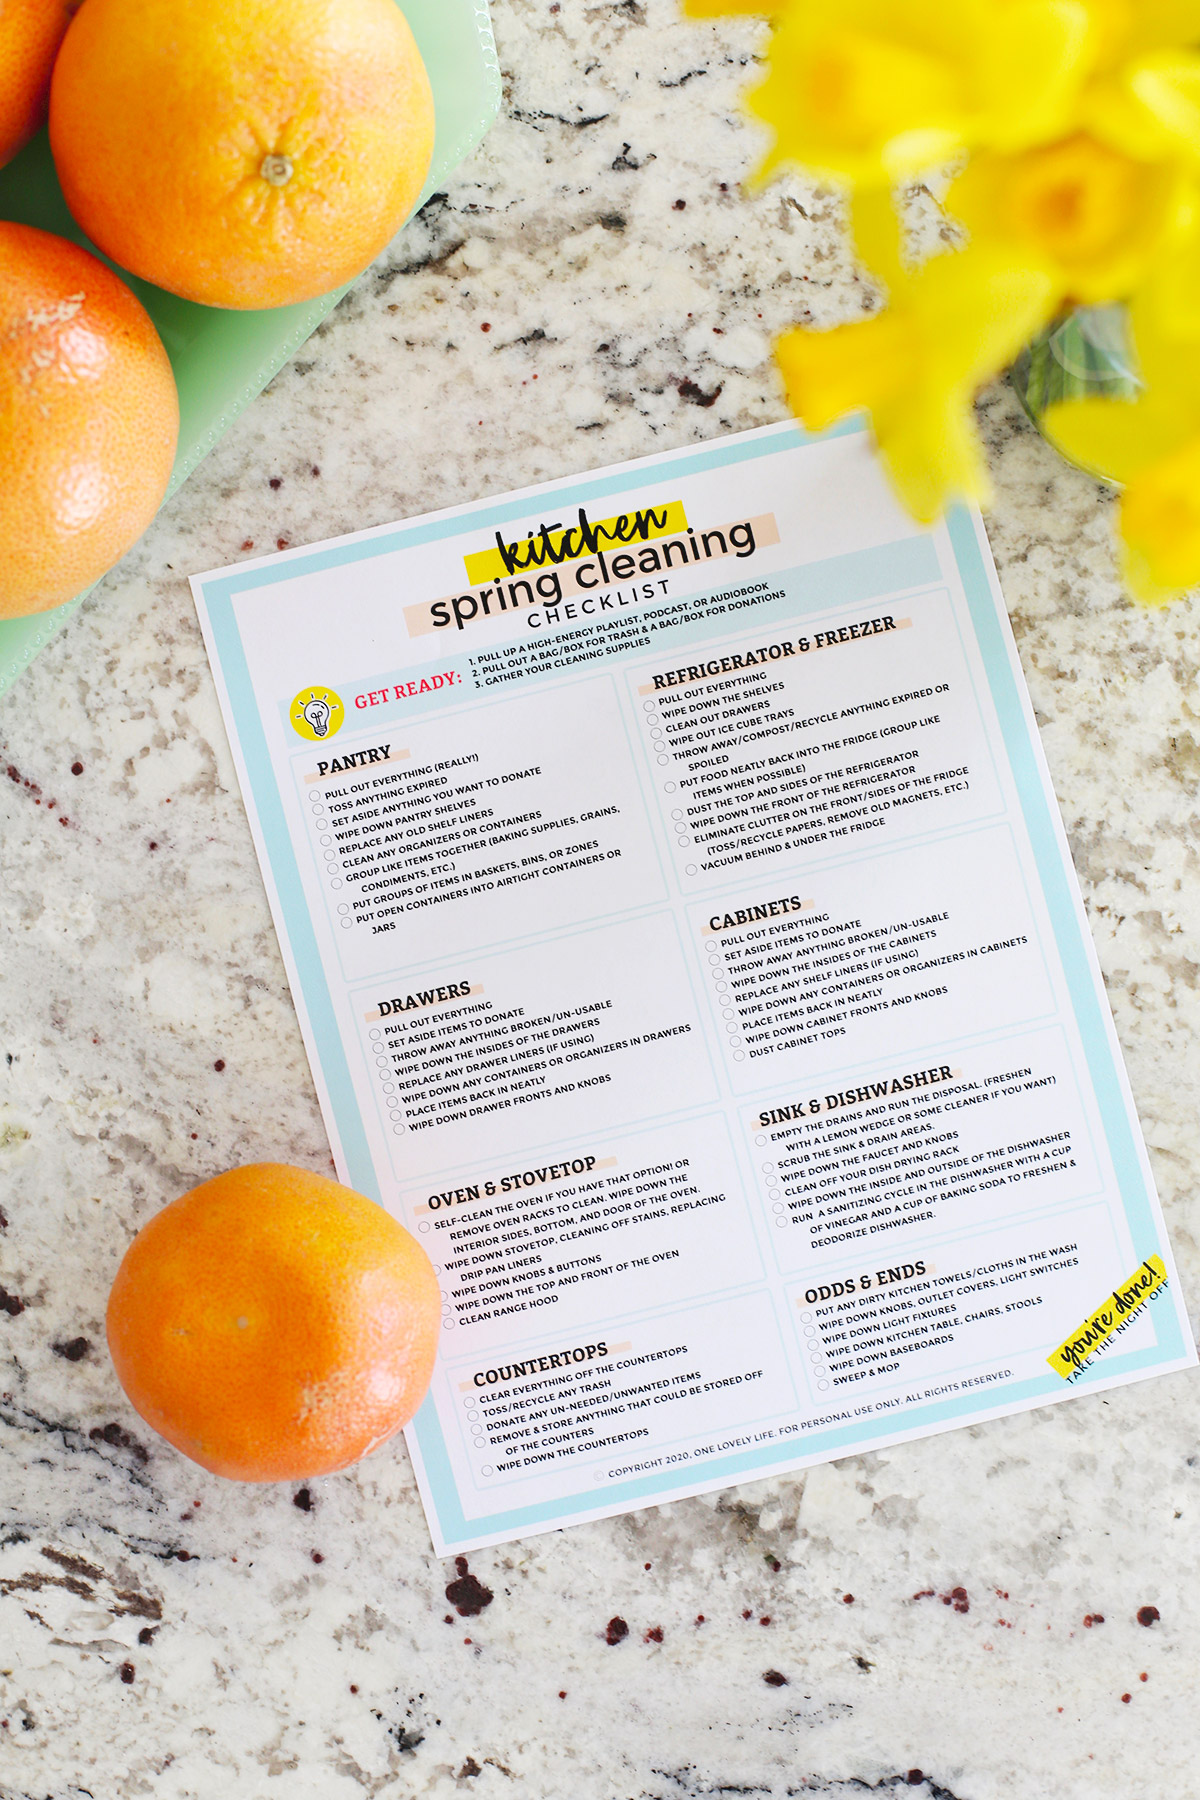 Free Printable Cleaning Checklist from One Lovely Life